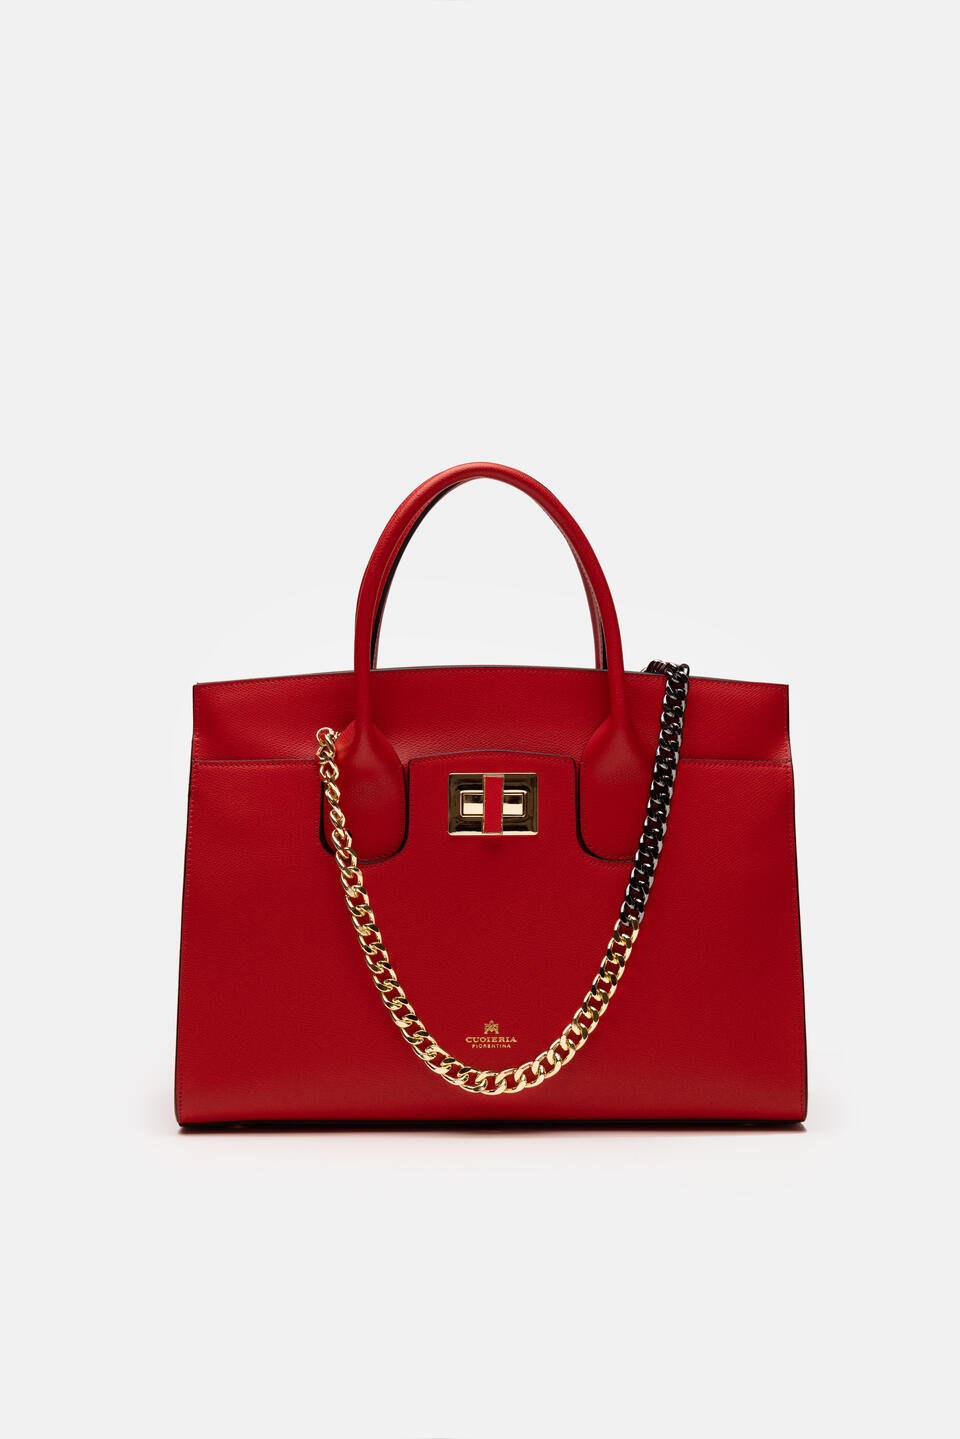 Large tote bag Red  - Tote Bag - Women's Bags - Bags - Cuoieria Fiorentina